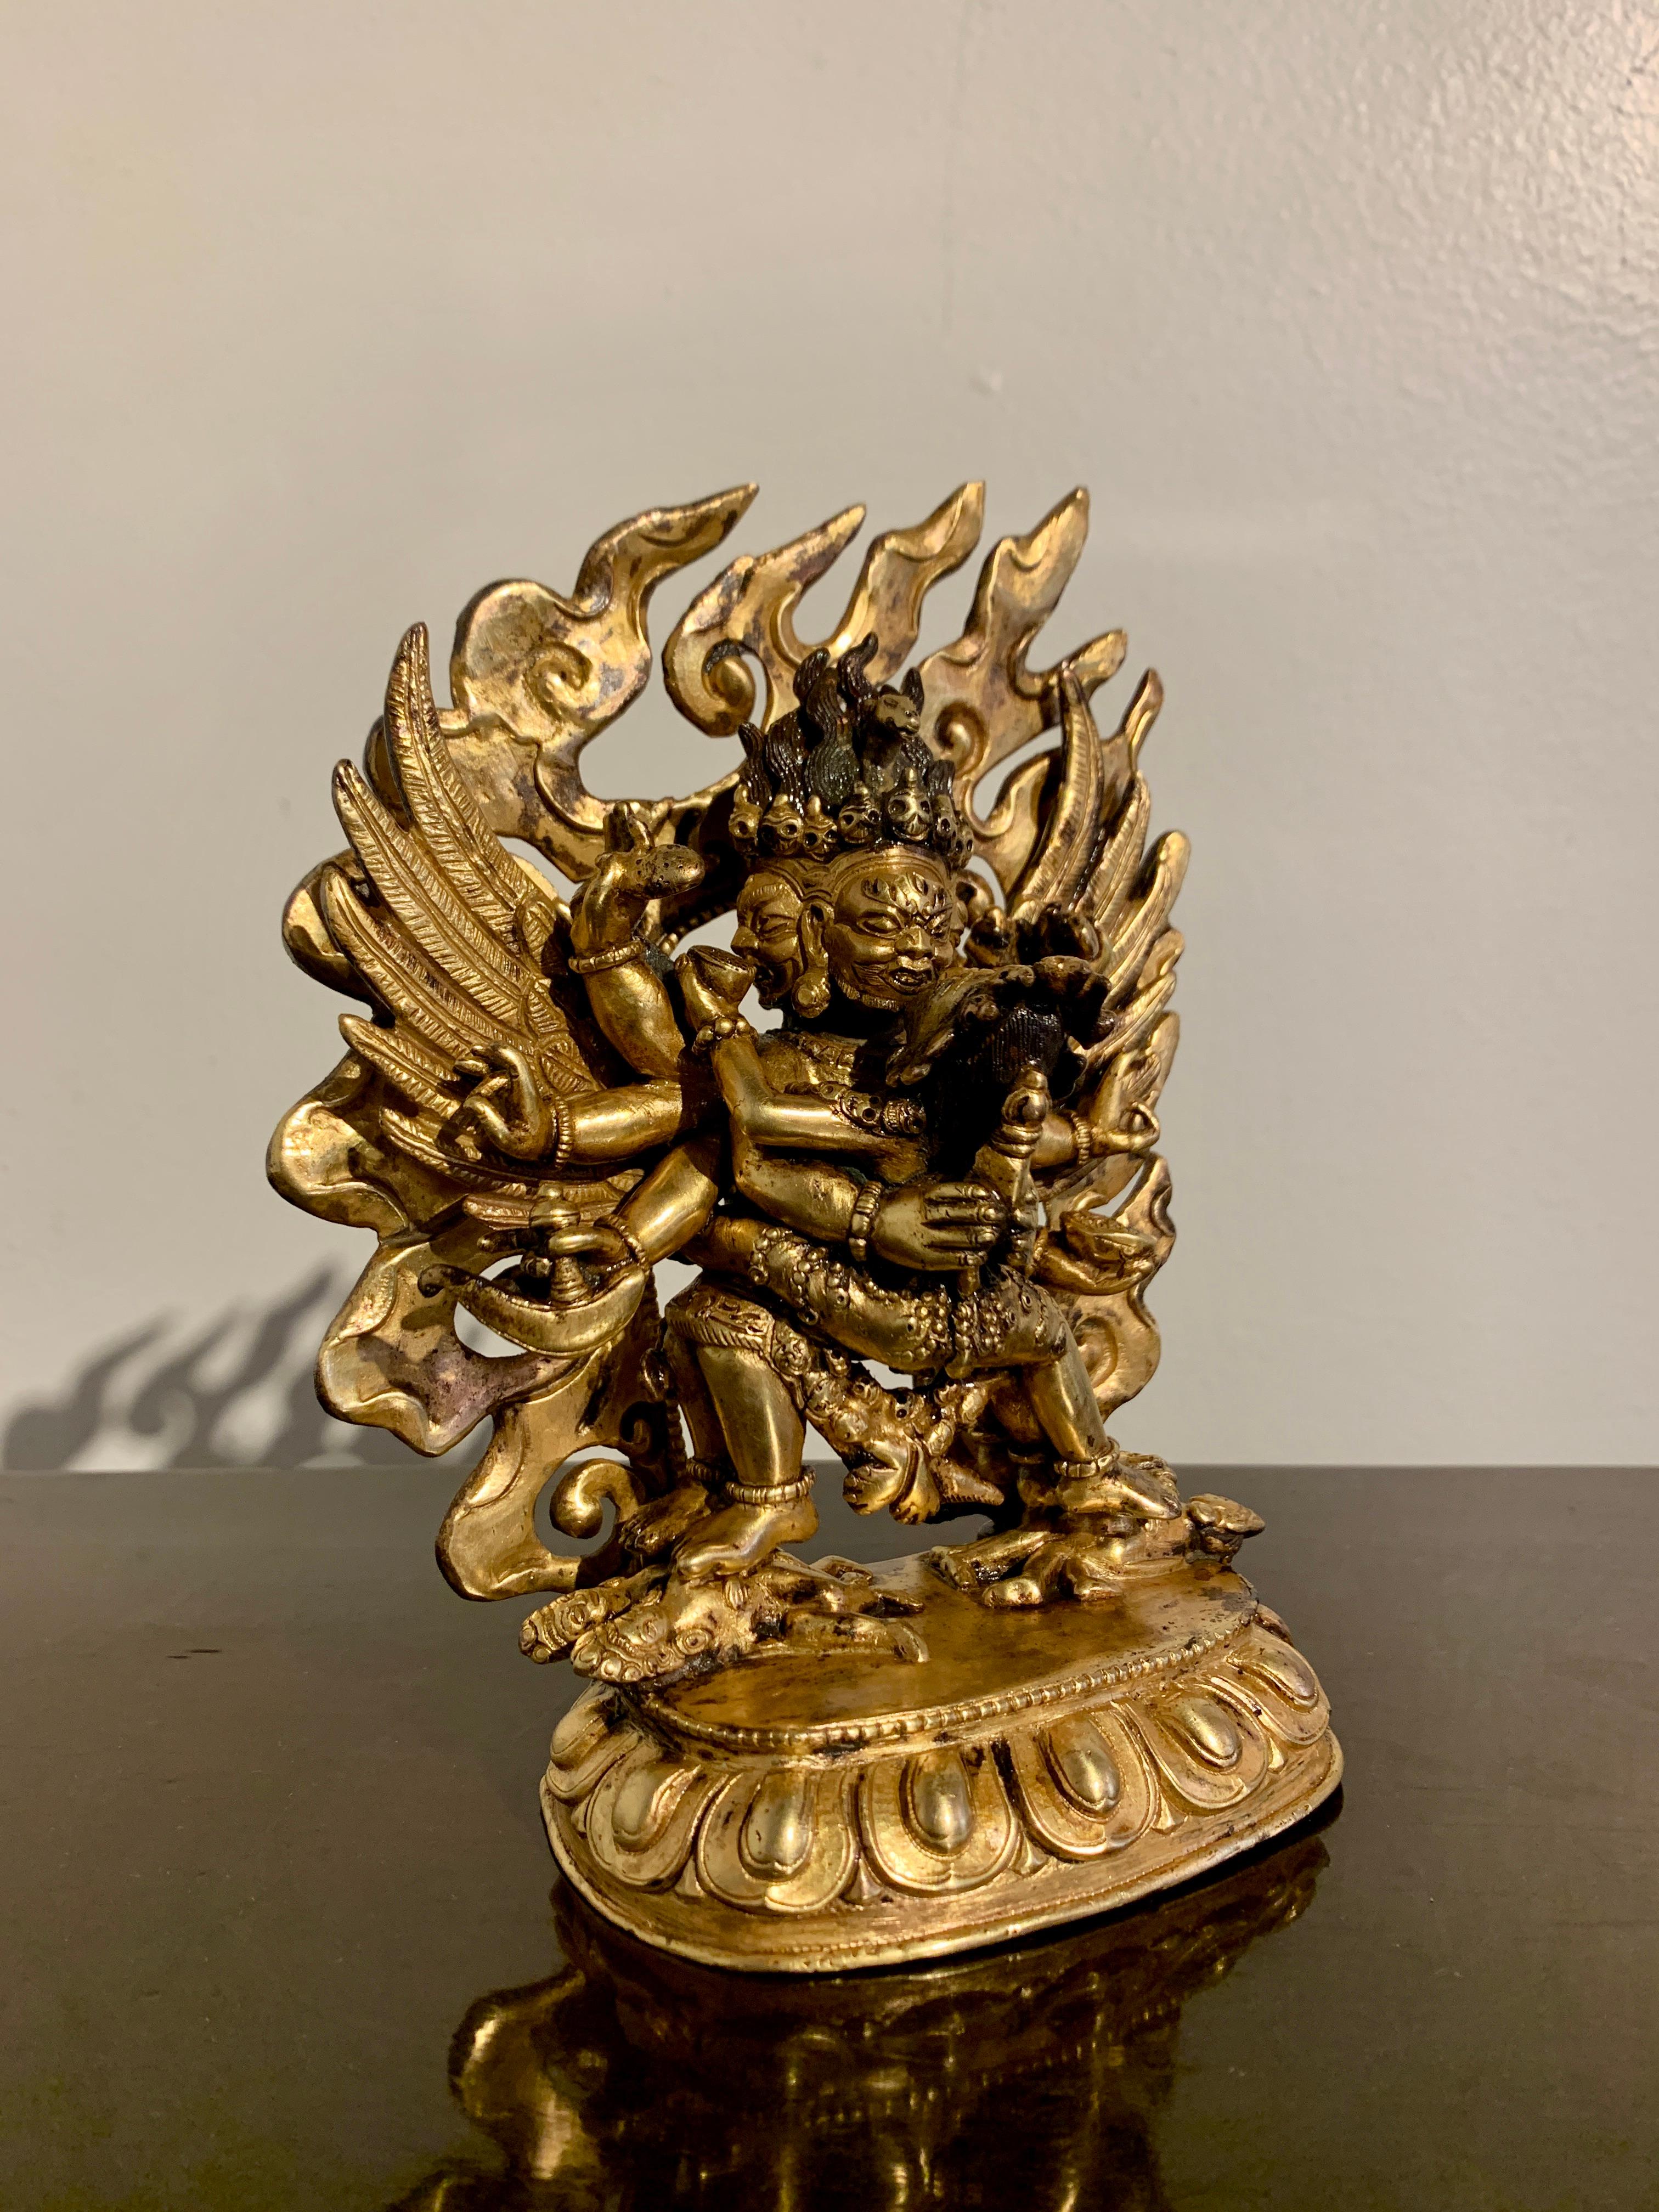 A fantastic and powerful Sino-Tibetan gilt bronze figure of Hayagriva and his consort Vajravarahi, created in Tibet for the Chinese market, 18th/19th century, Tibet.

The wrathful deity Hayagriva can be identified by the small horse head rising from